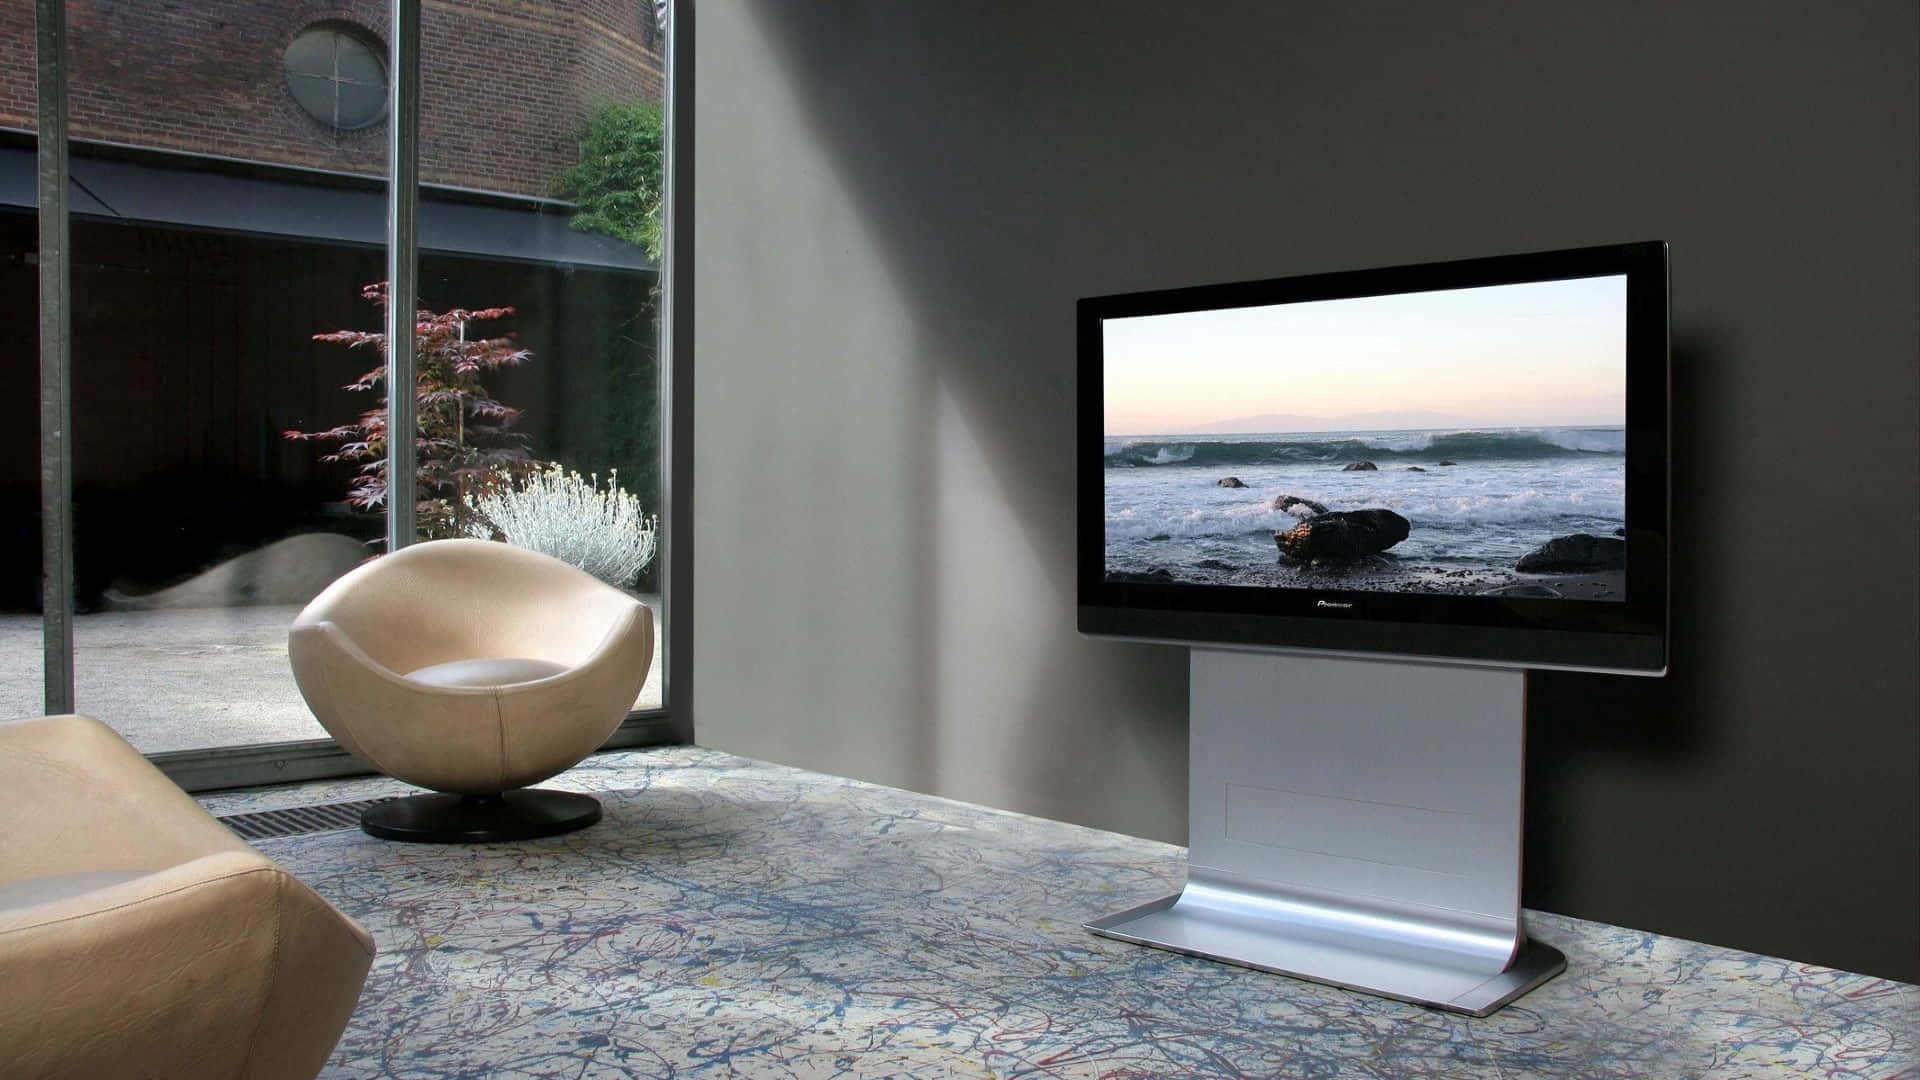 Get the latest technology with this modern television set which brings the world to your living room. Wallpaper